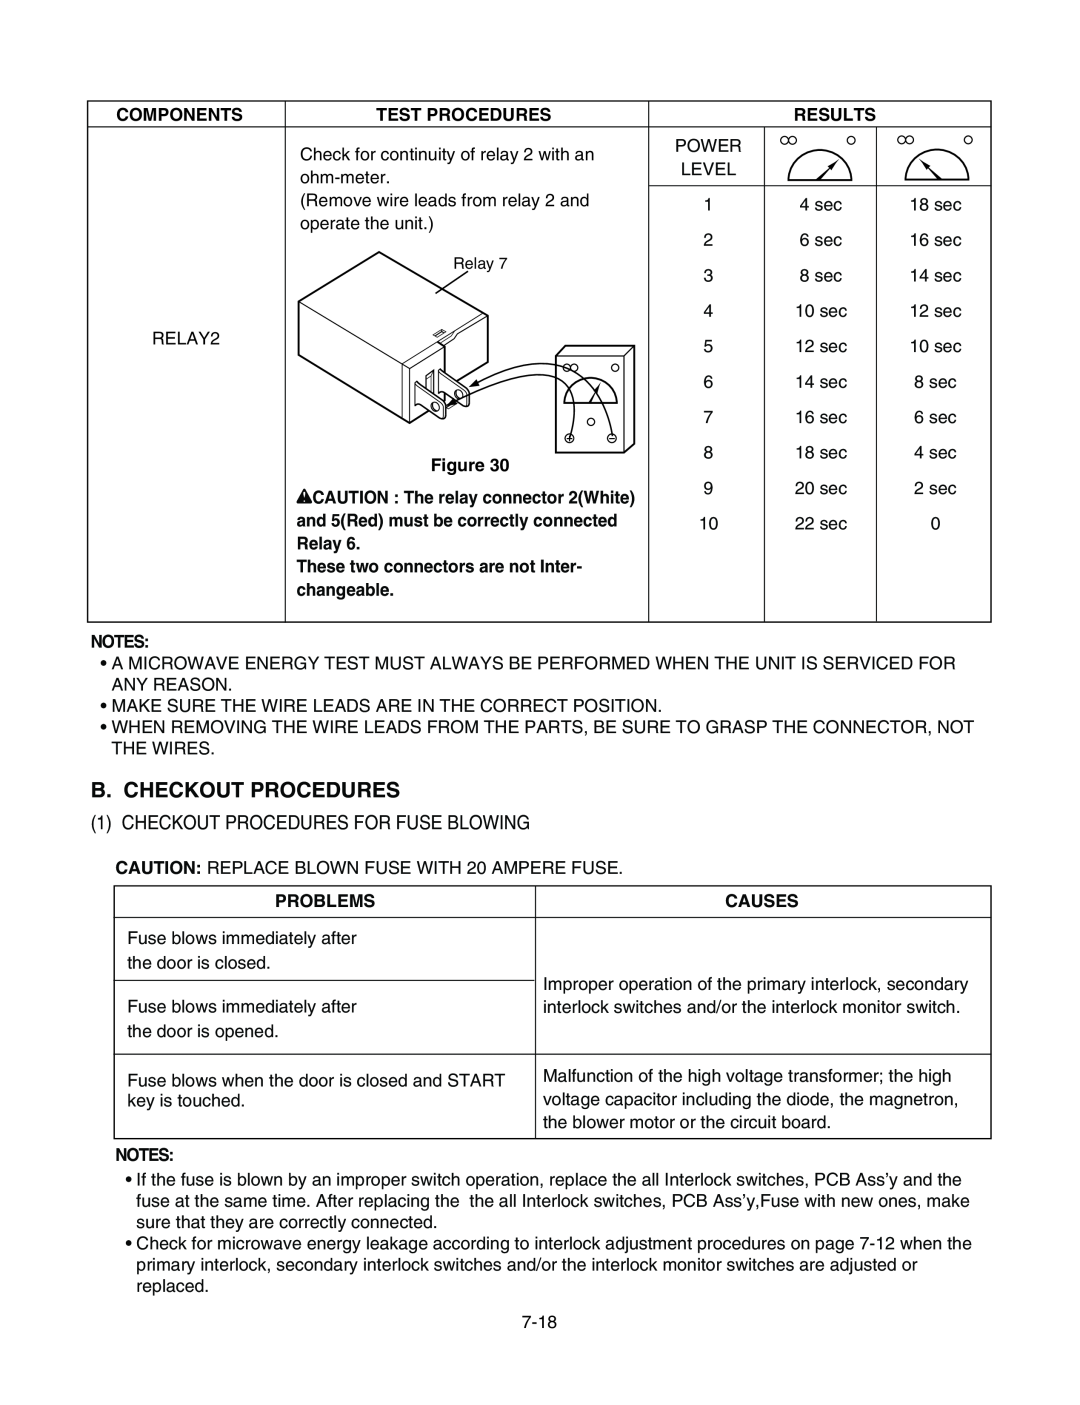 LG Electronics LMV1625W Checkout Procedures For Fuse Blowing, Components, Test Procedures, Results, Relay, changeable 